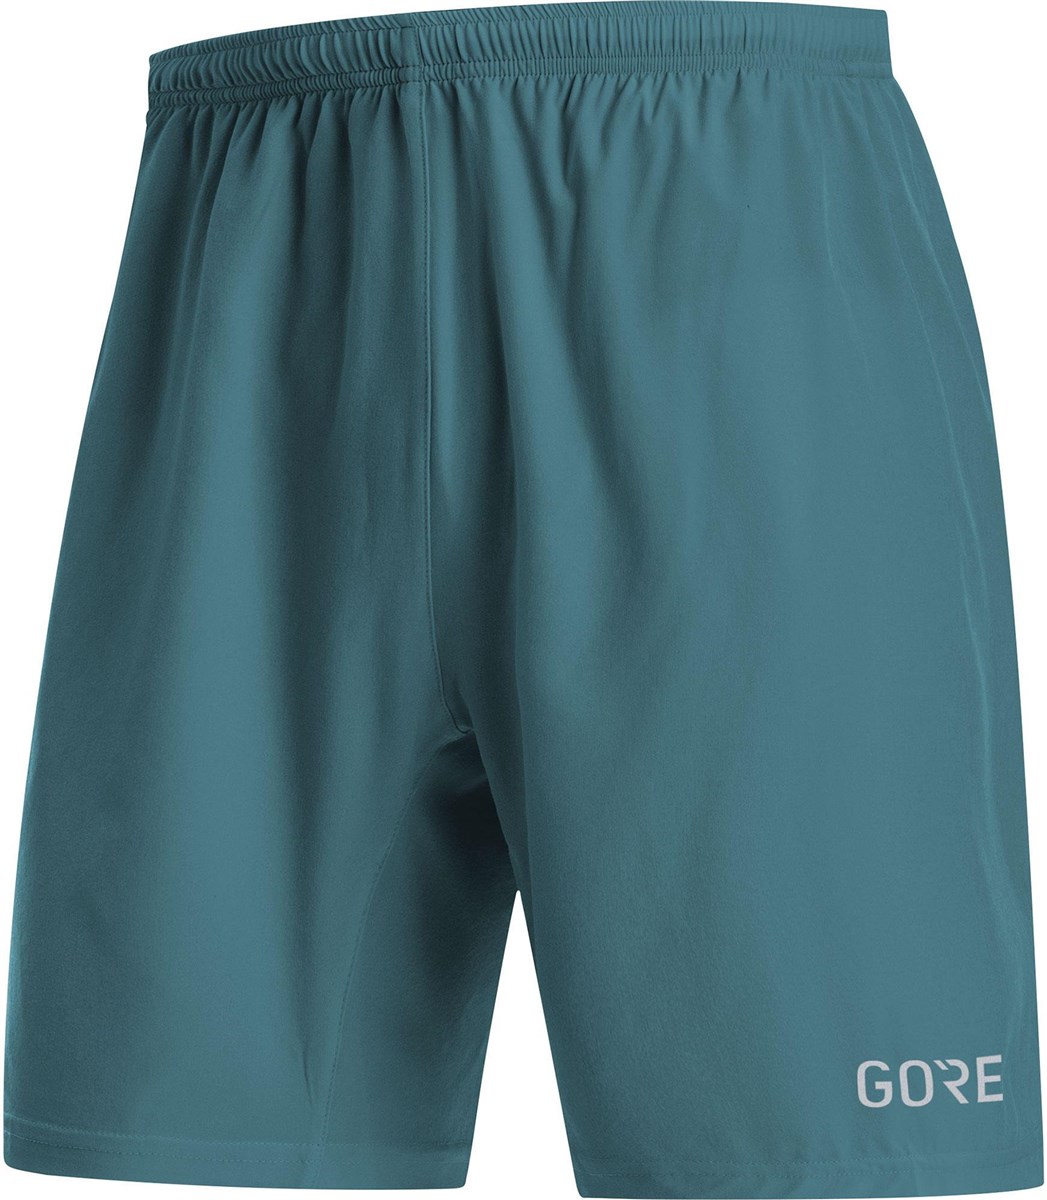 Gore R5 5" Shorts product image